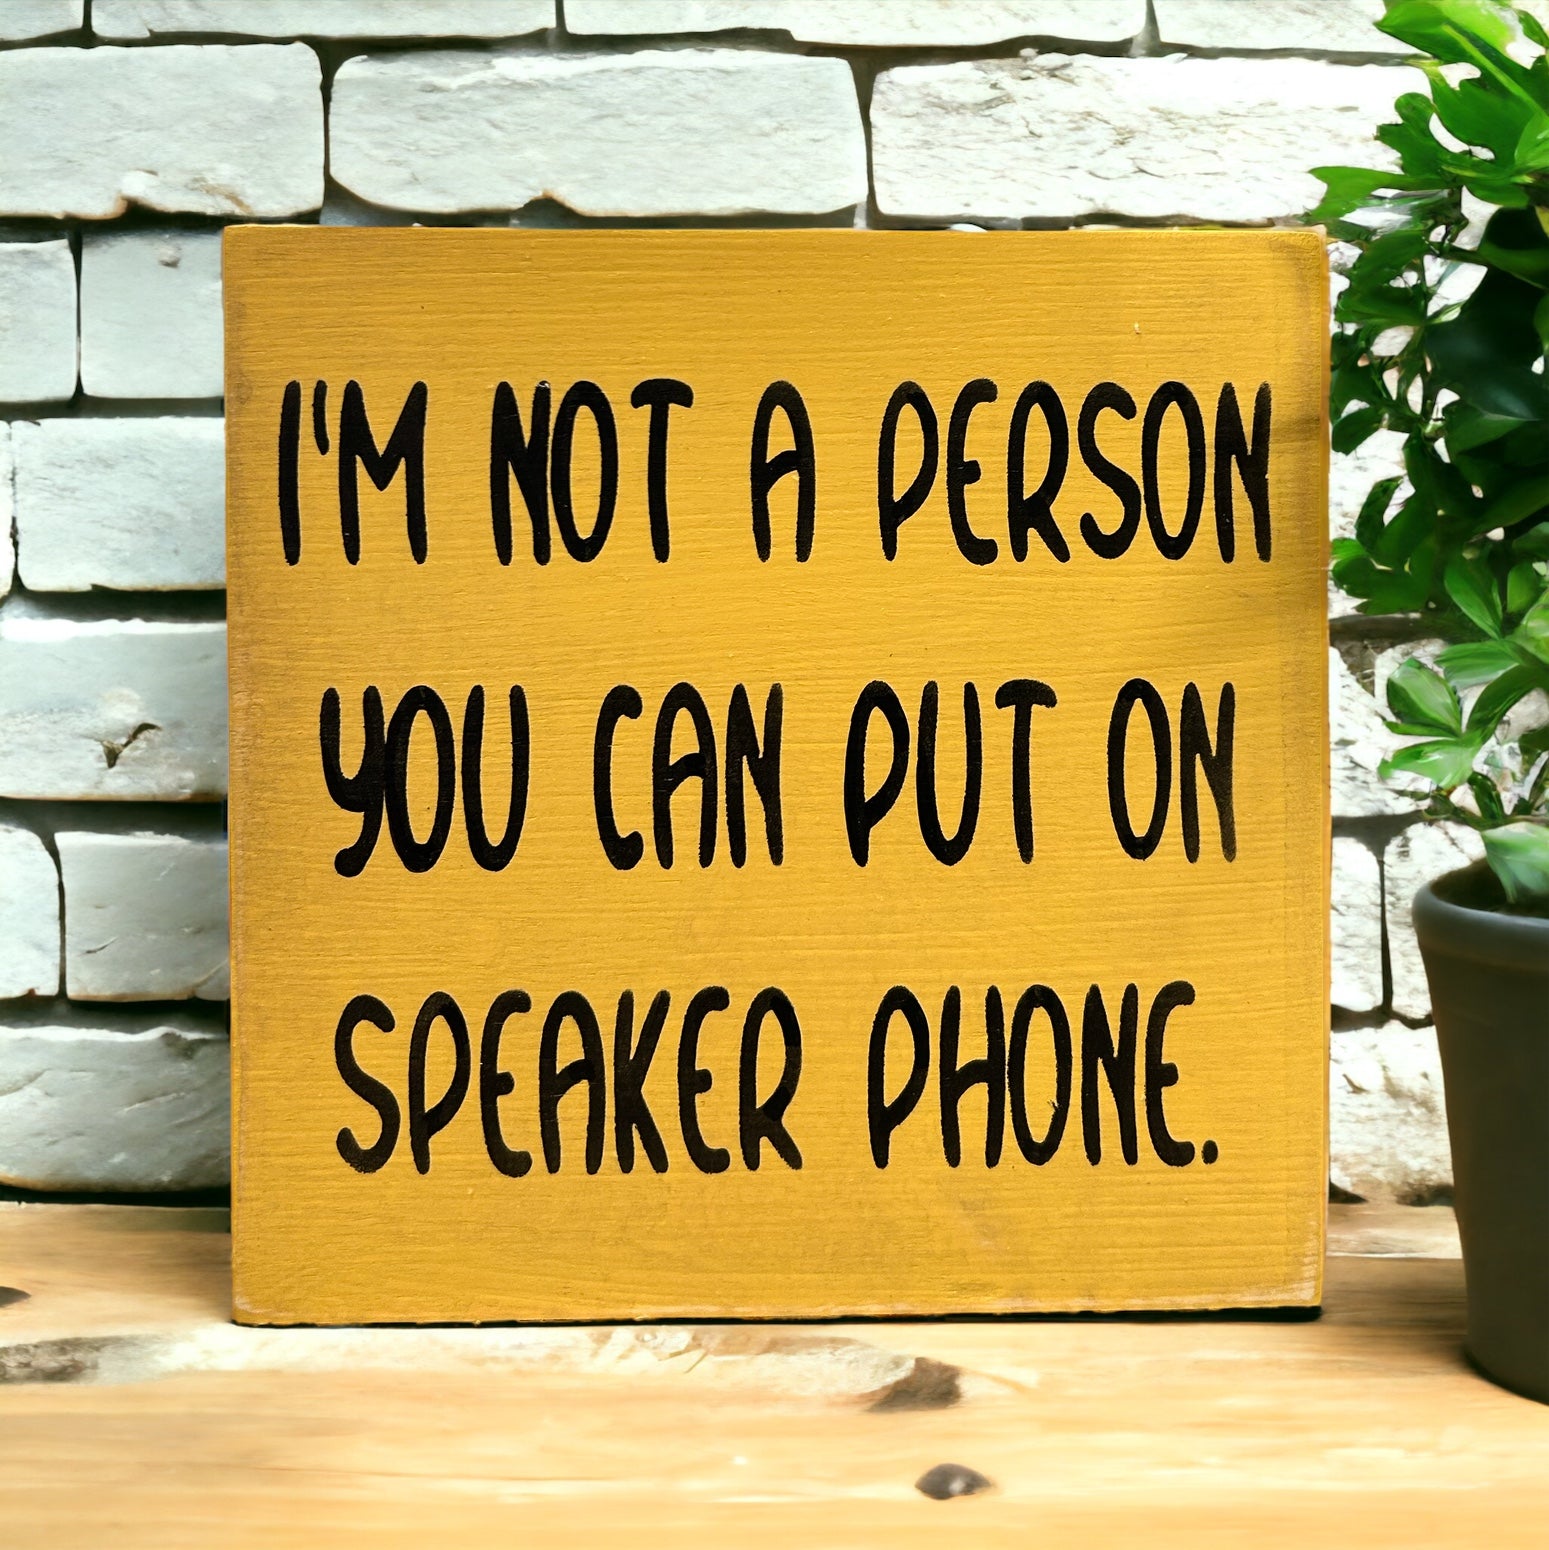 "I'm not a person you can put on speakerphone" wood sign